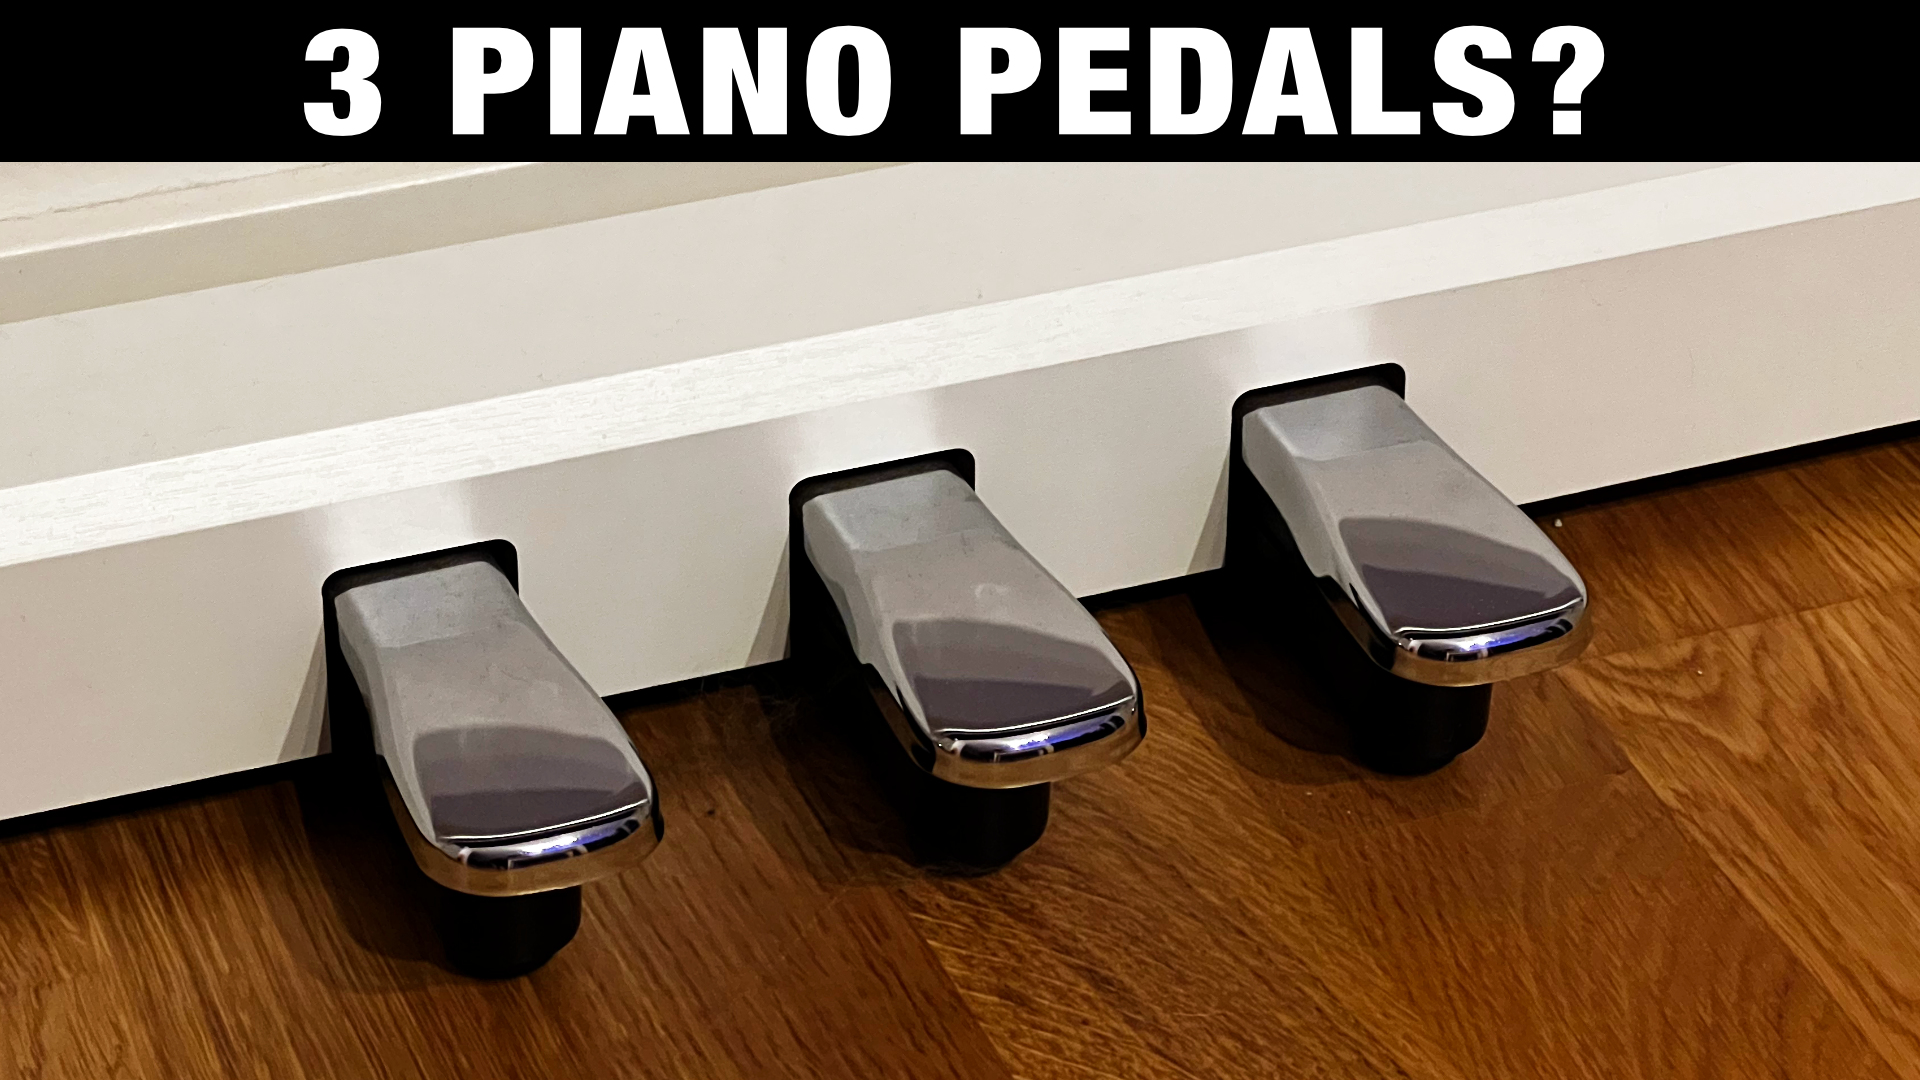 The 3 Piano Pedals Explained